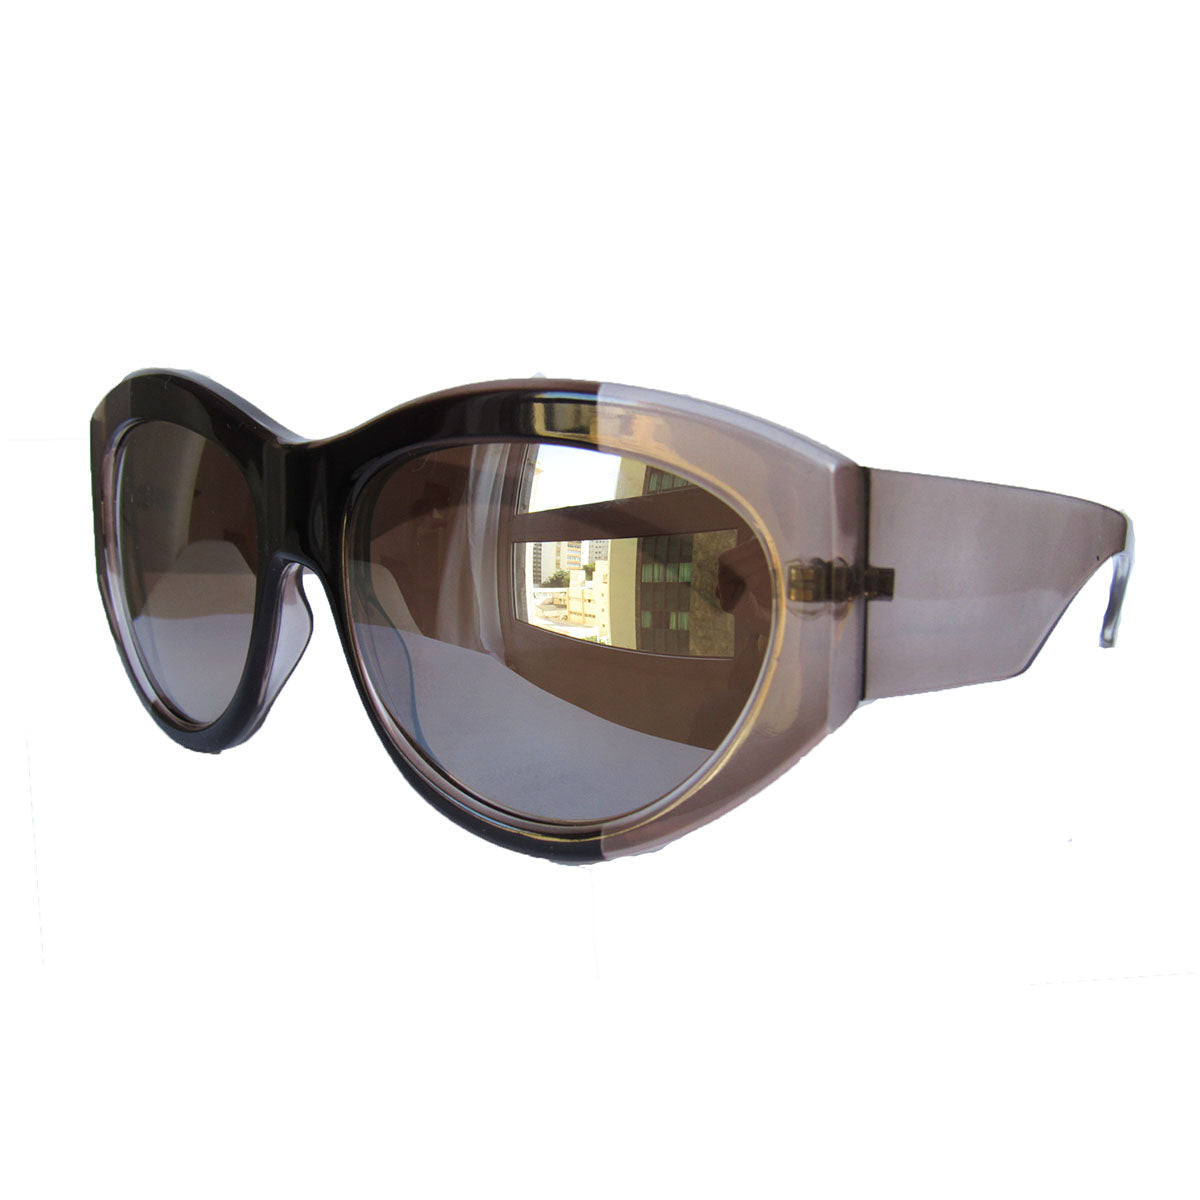 Mask Style Brown and Crystal Brown Bicoloured Sunglasses w/ Silver Mirrored Lenses